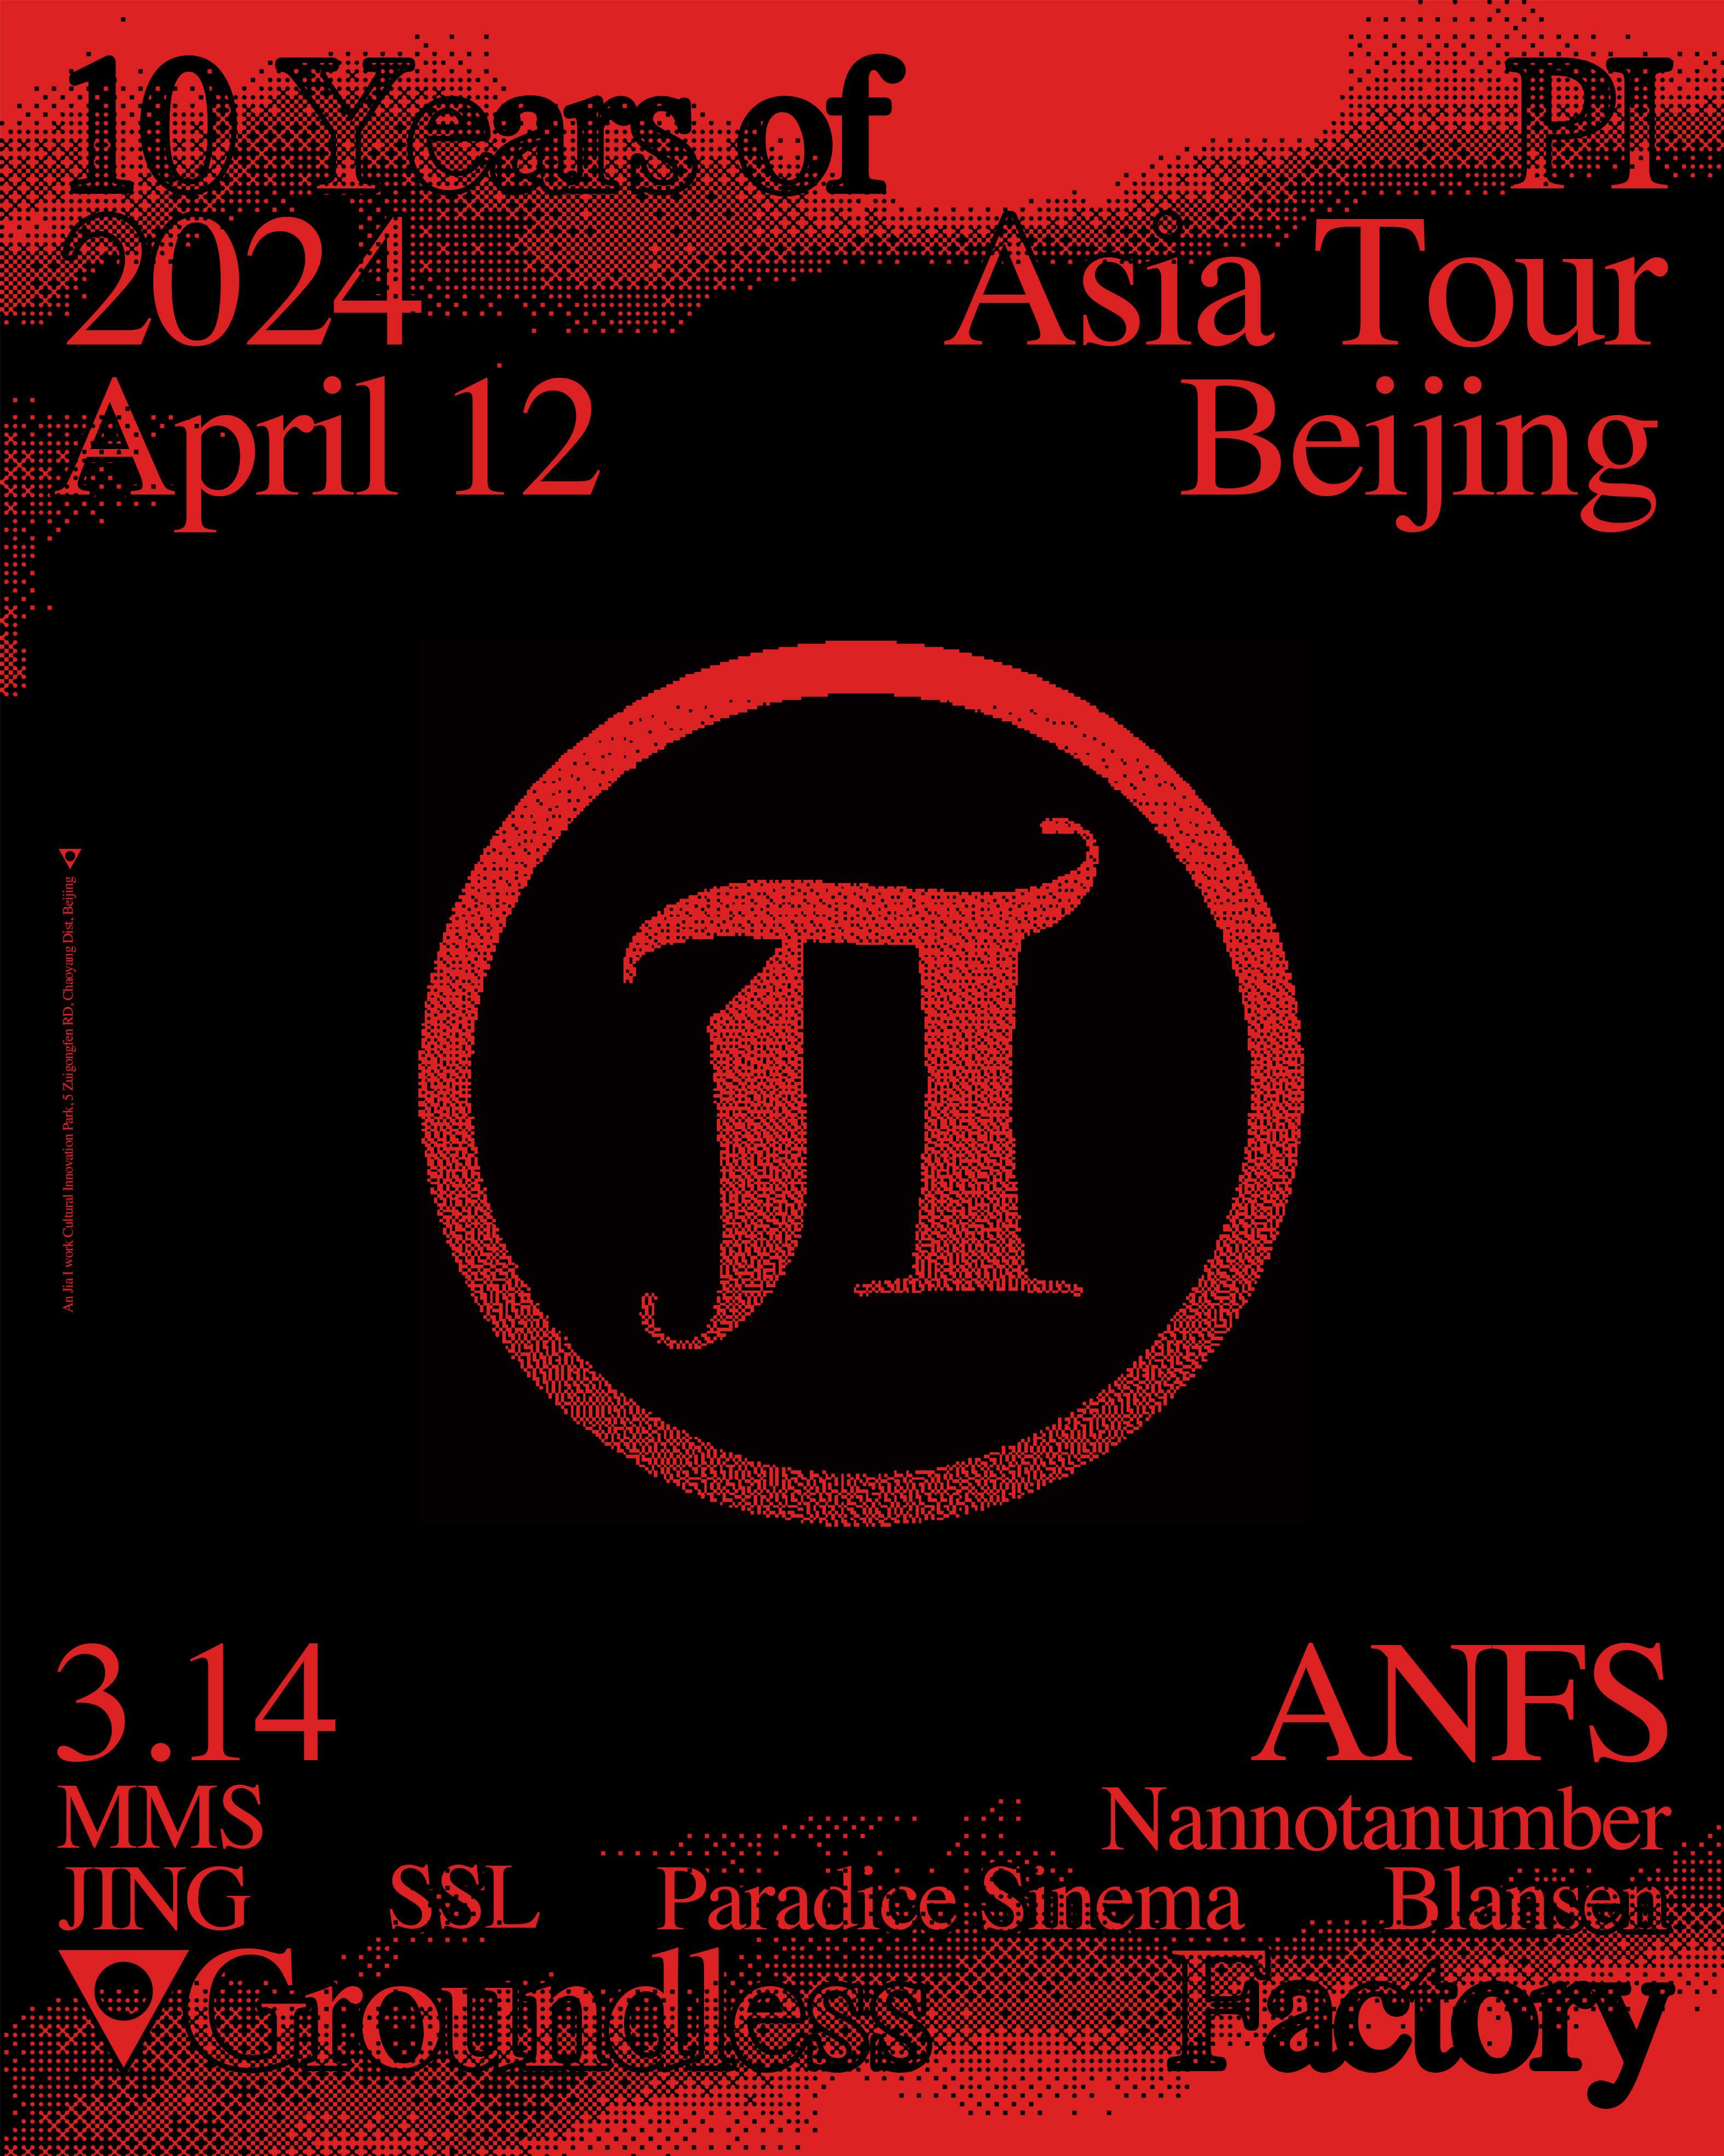 10 years of π (Pi Electronics) with 3.14 & ANFS - フライヤー表